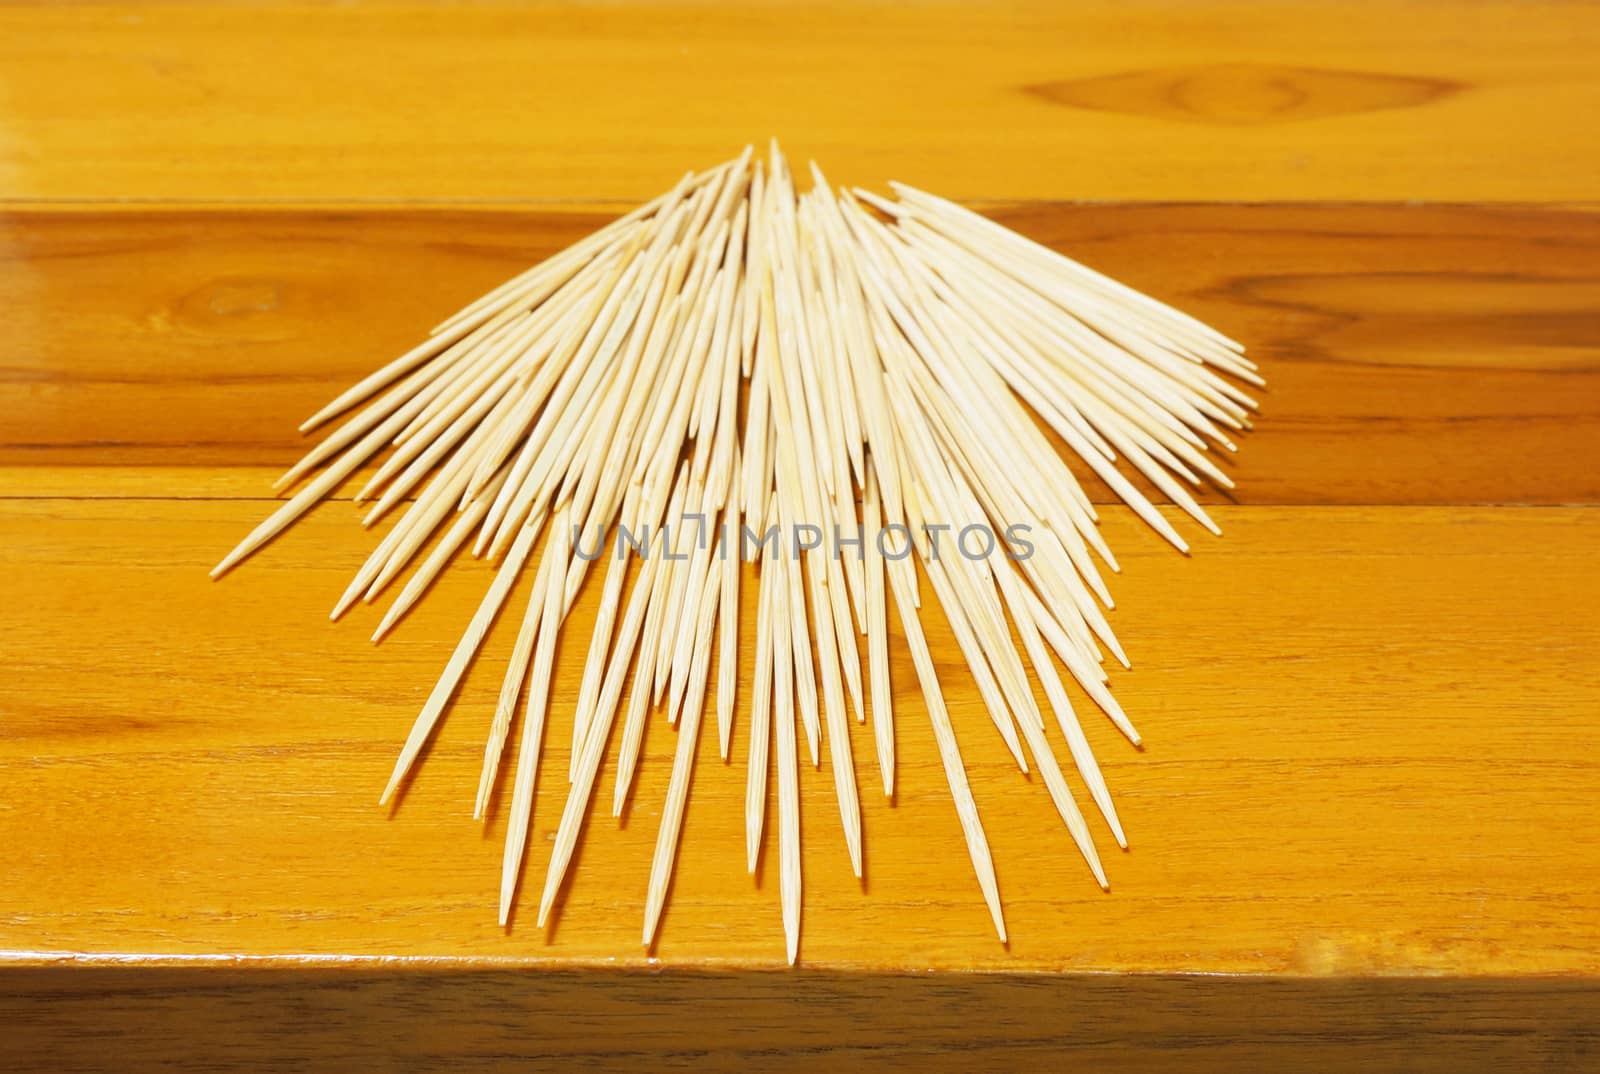 Several toothpicks on a wooden table by ninun